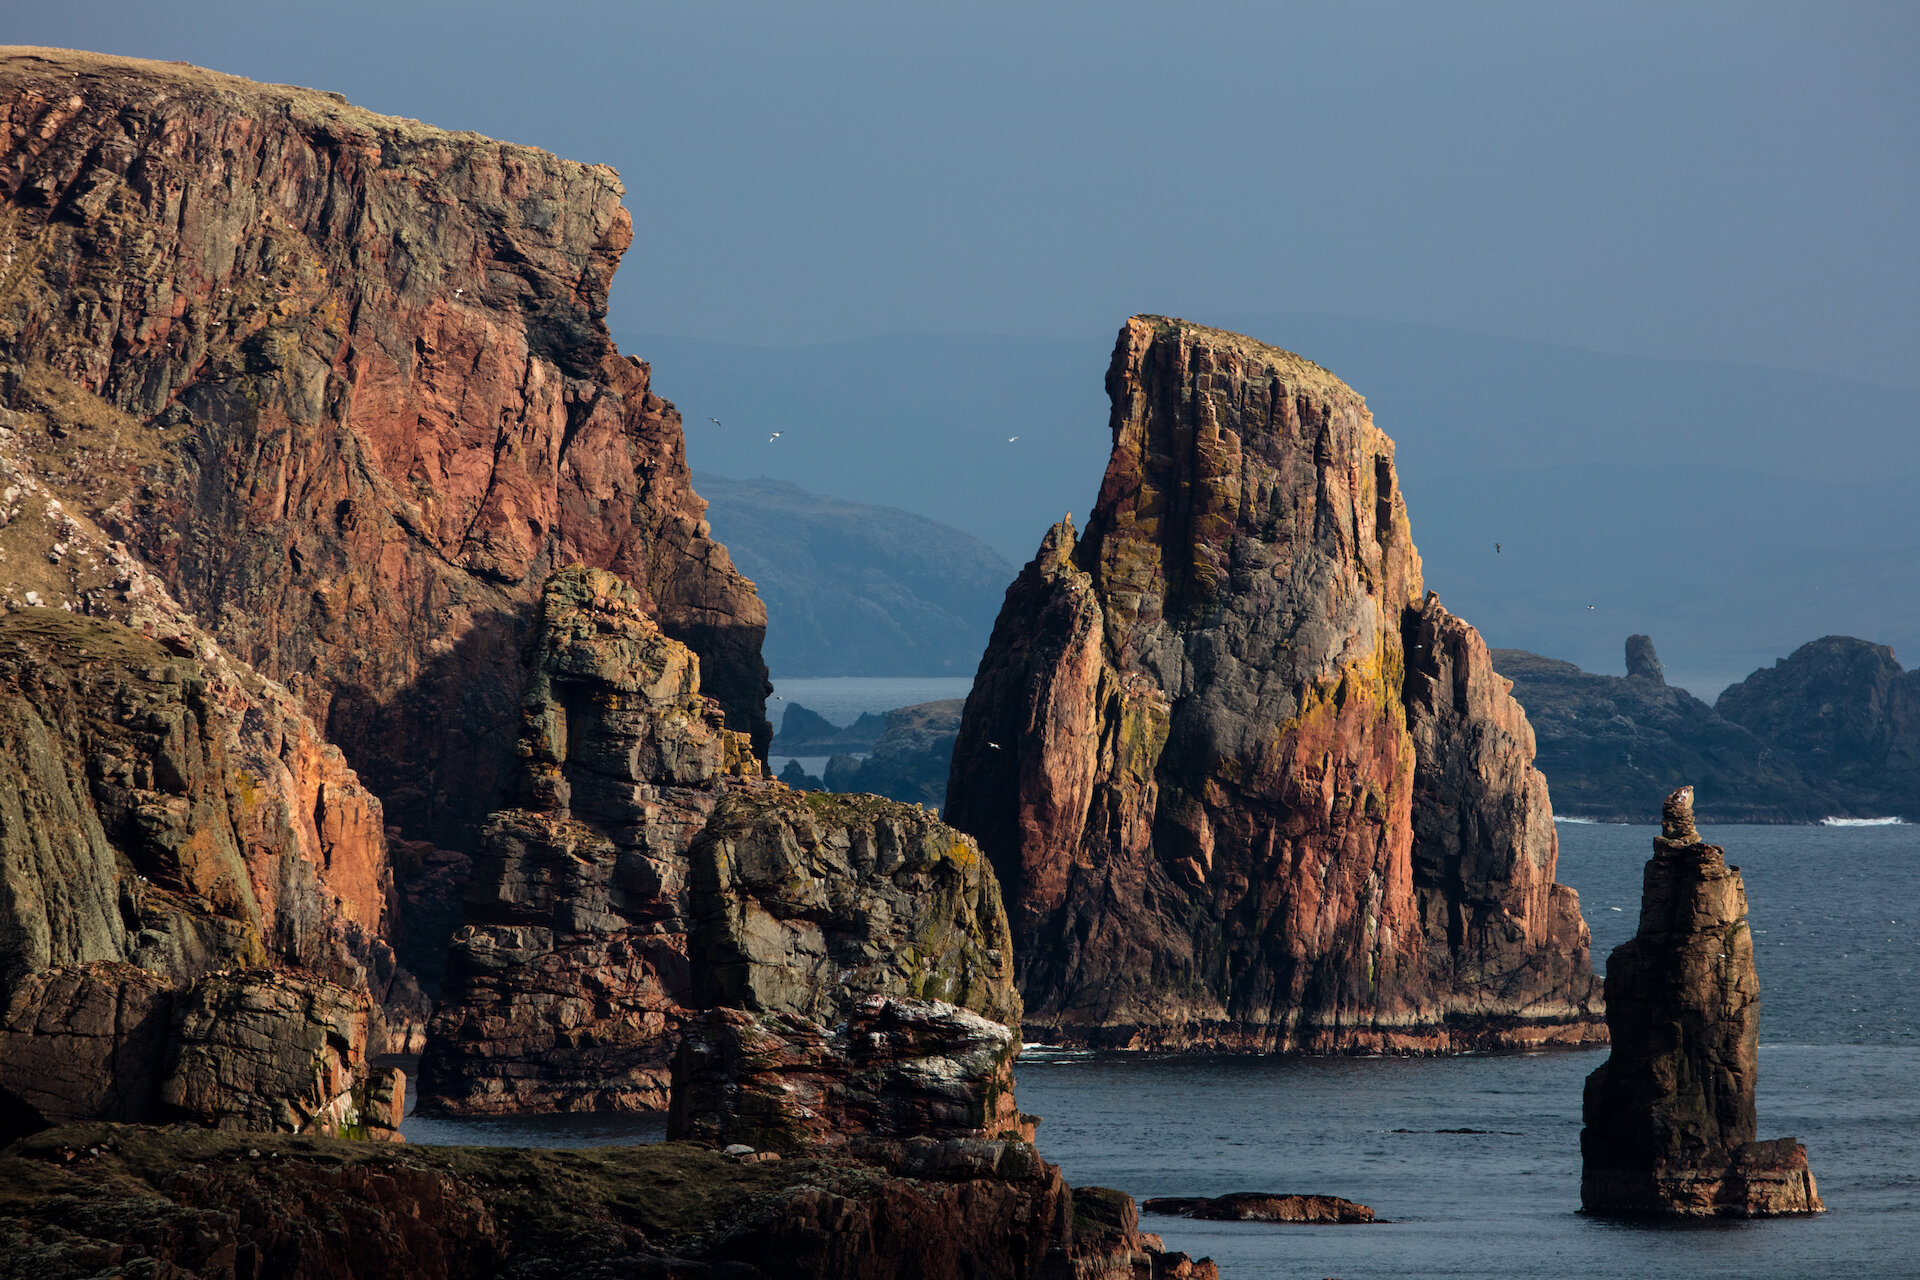 Shetland's cliffs and stacks evidence millions of years of history